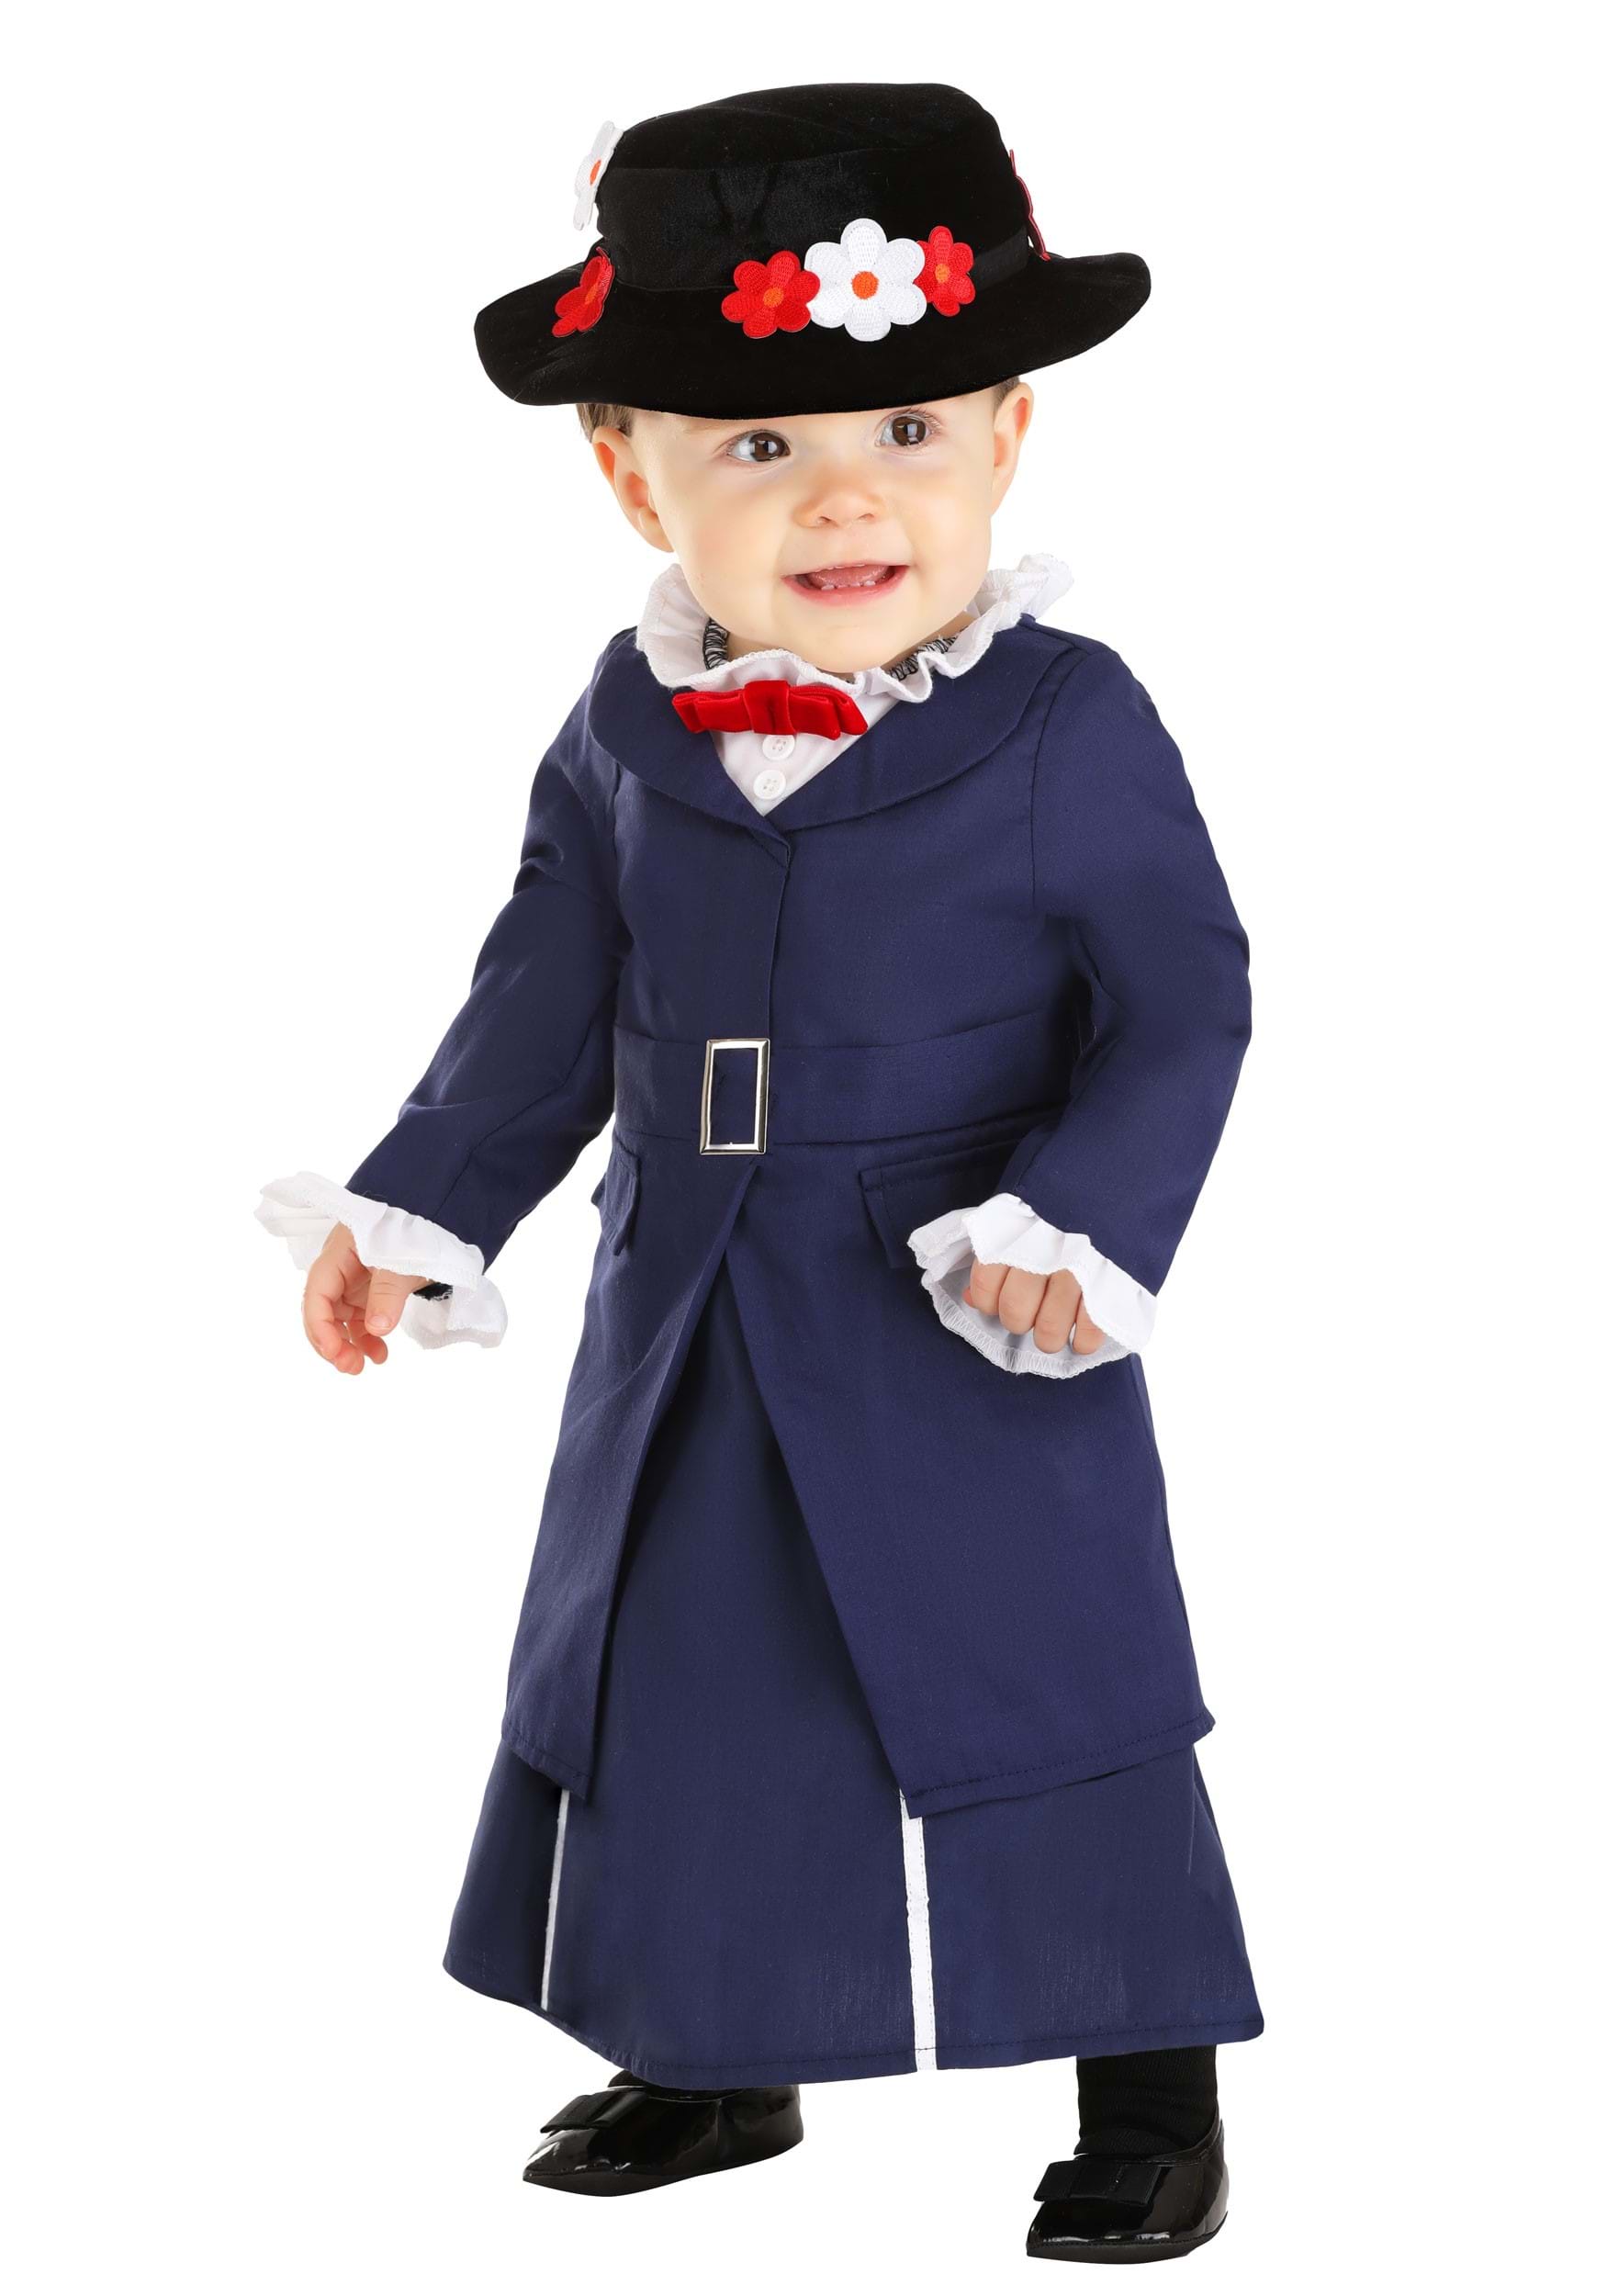 Infant Marry Poppins Costume | Infant Disney Costumes